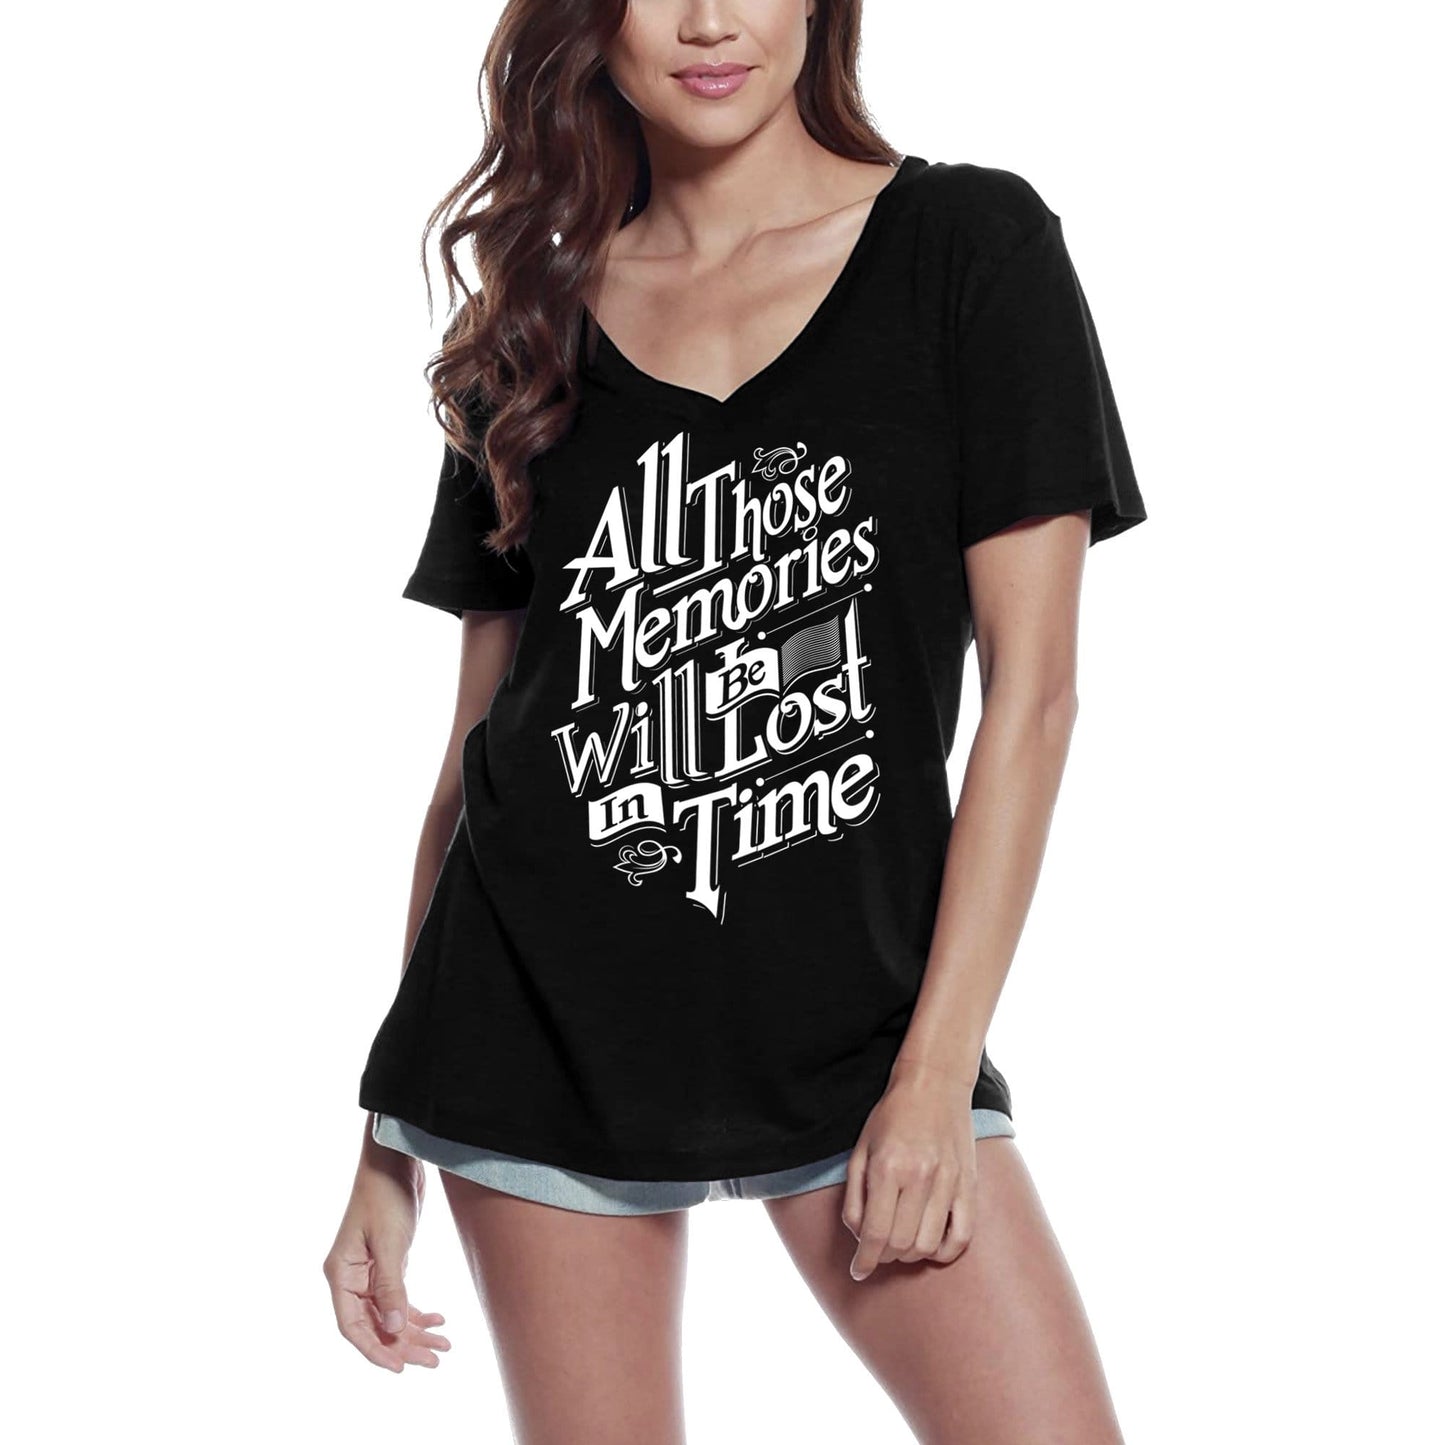 ULTRABASIC Women's T-Shirt All Those Memories Will Be Lost - Slogan Graphic Tee